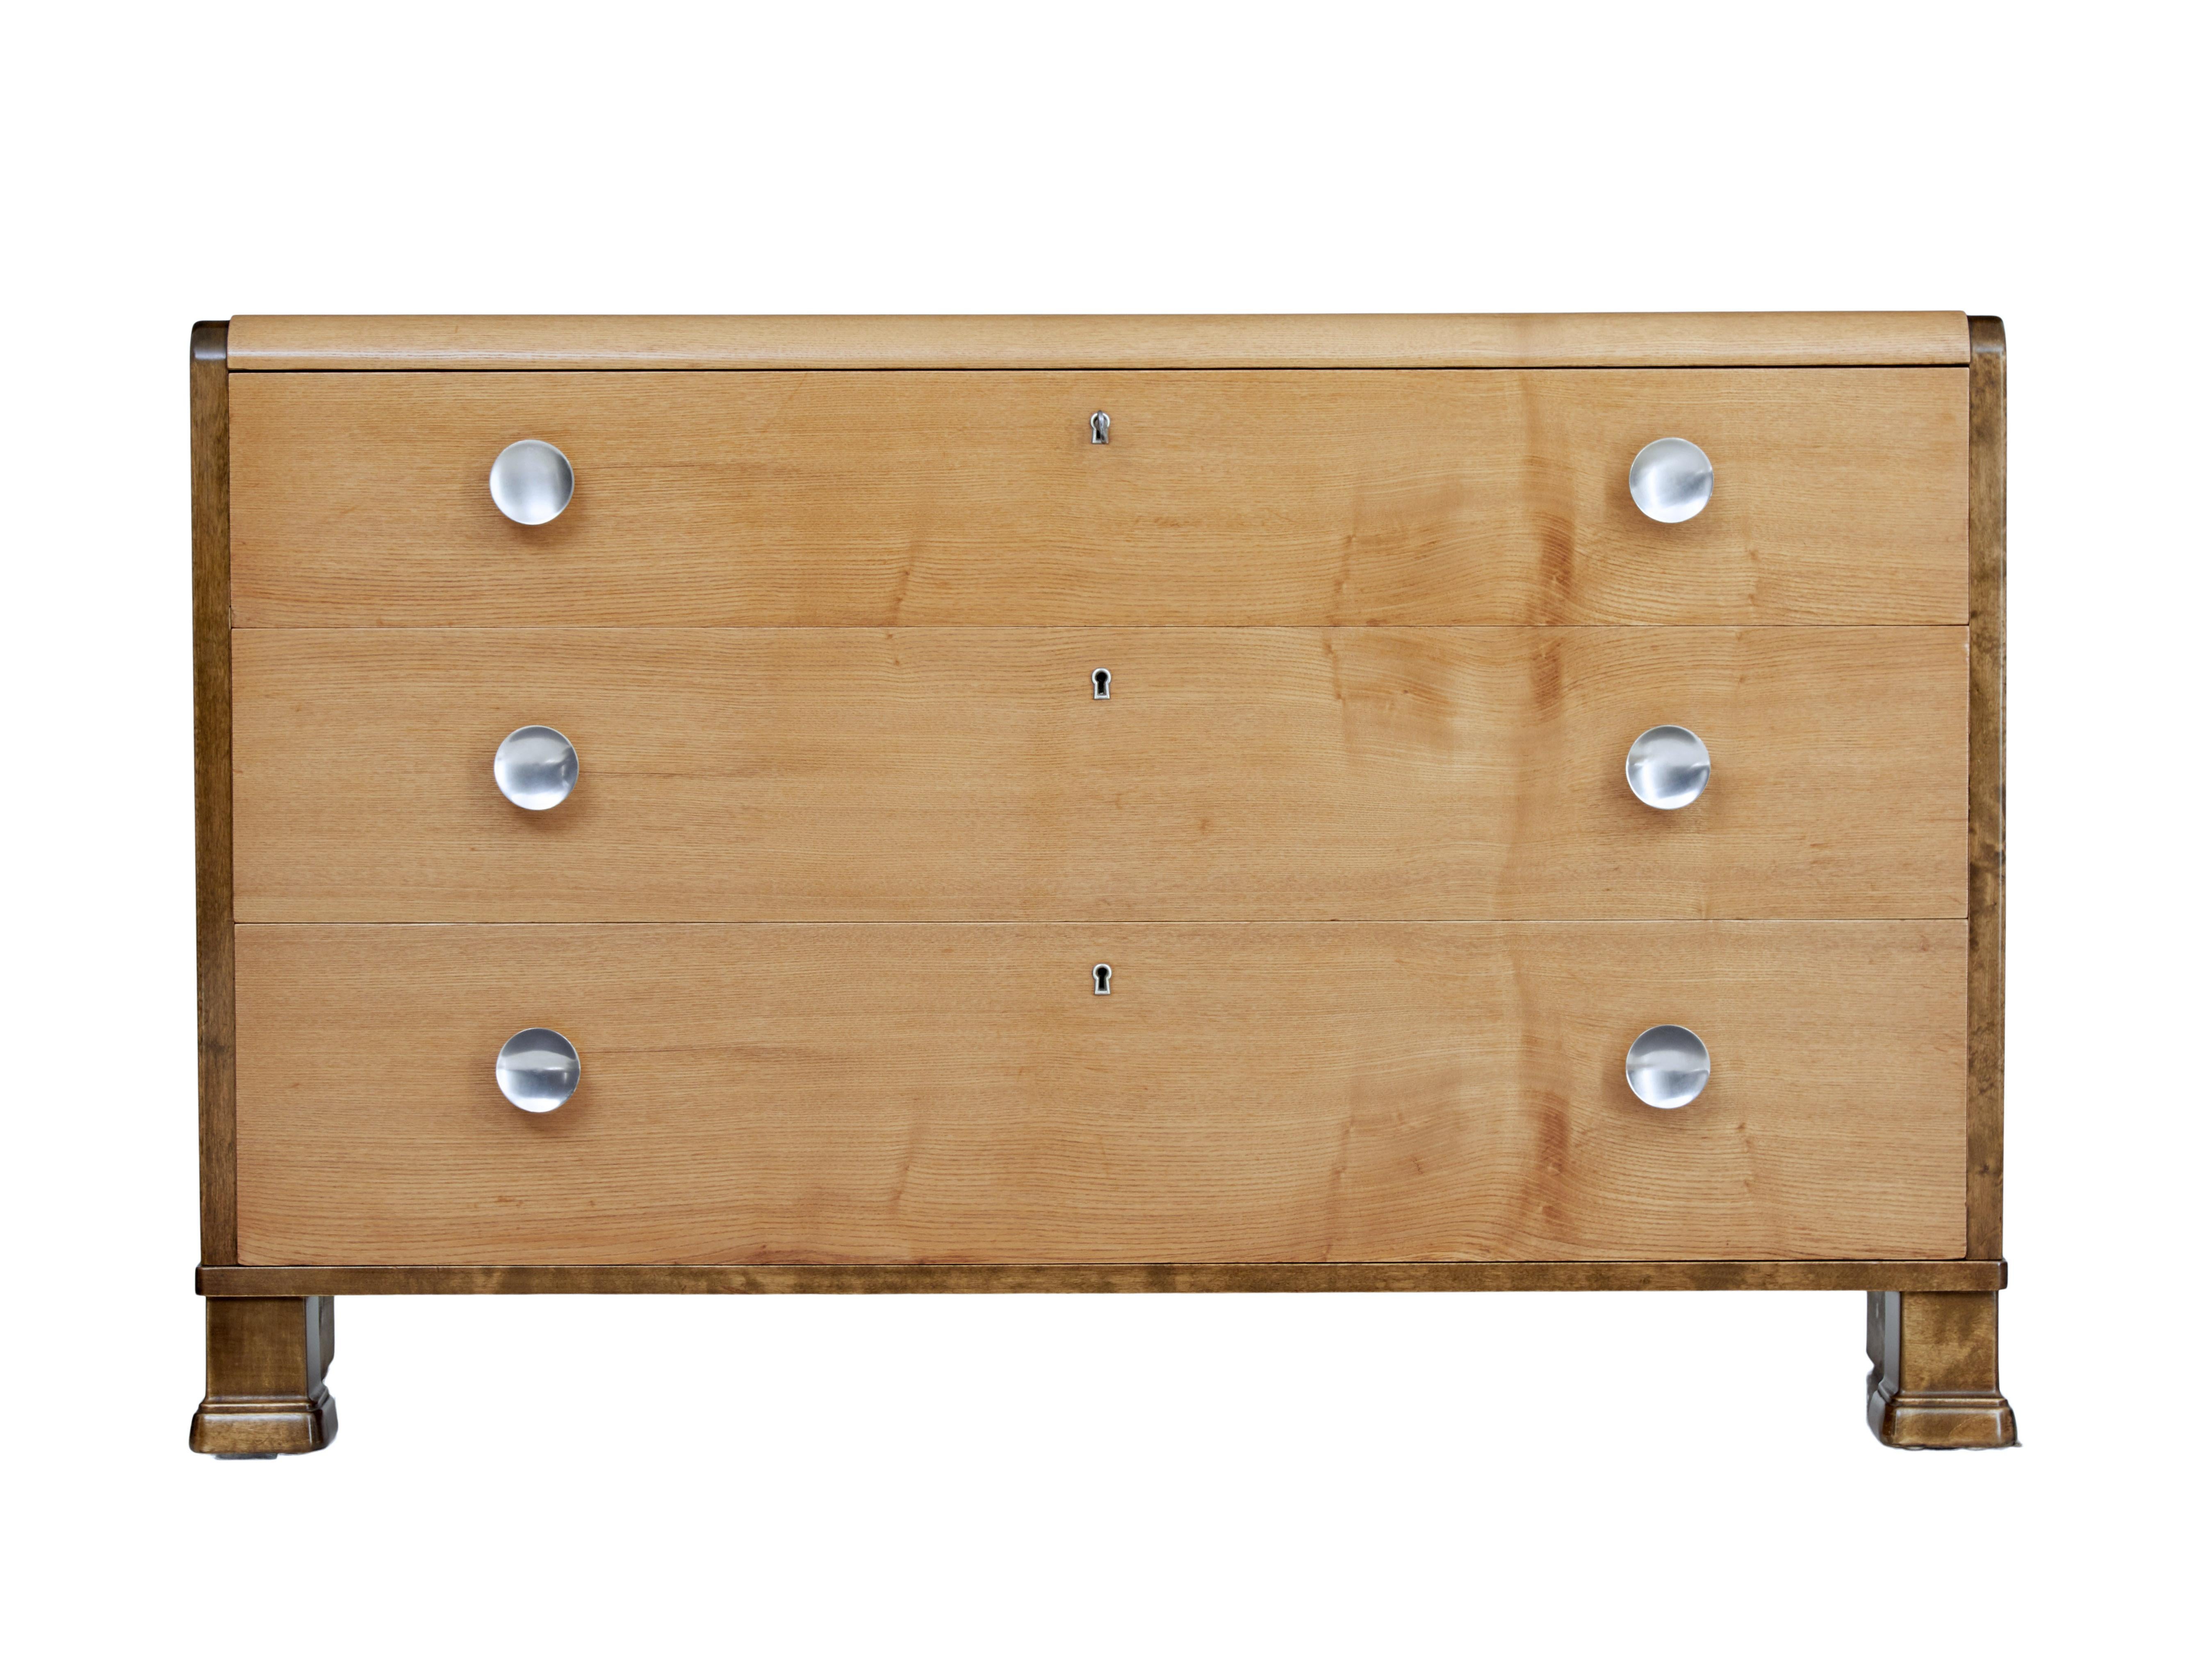 Mid-20th century elm and birch Scandinavian chest of drawers, circa 1960.

Fine quality chest of drawers. Fitted with 3 graduating drawers veneered in elm which also covers the top. Dark stained birch sides which flow down to the sledge